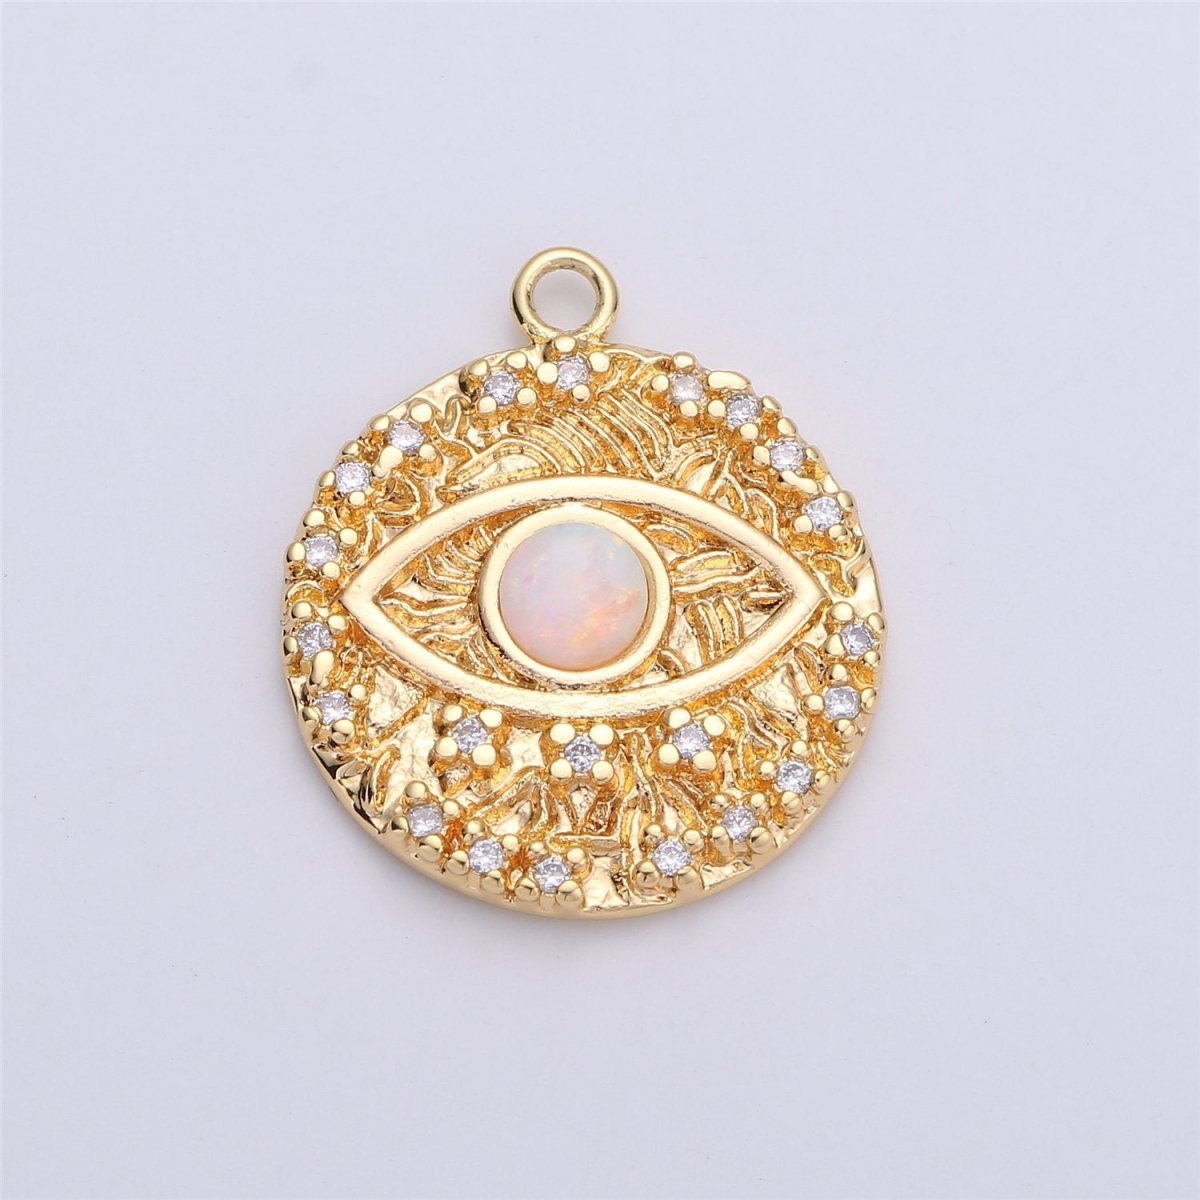 Opal Evil Eye Charm / Turquoise Evil Eye charm in Gold Filled for Necklace Bracelet Earring Charm for Jewelry Making Supply C-645,C-646 (OPAL) - DLUXCA